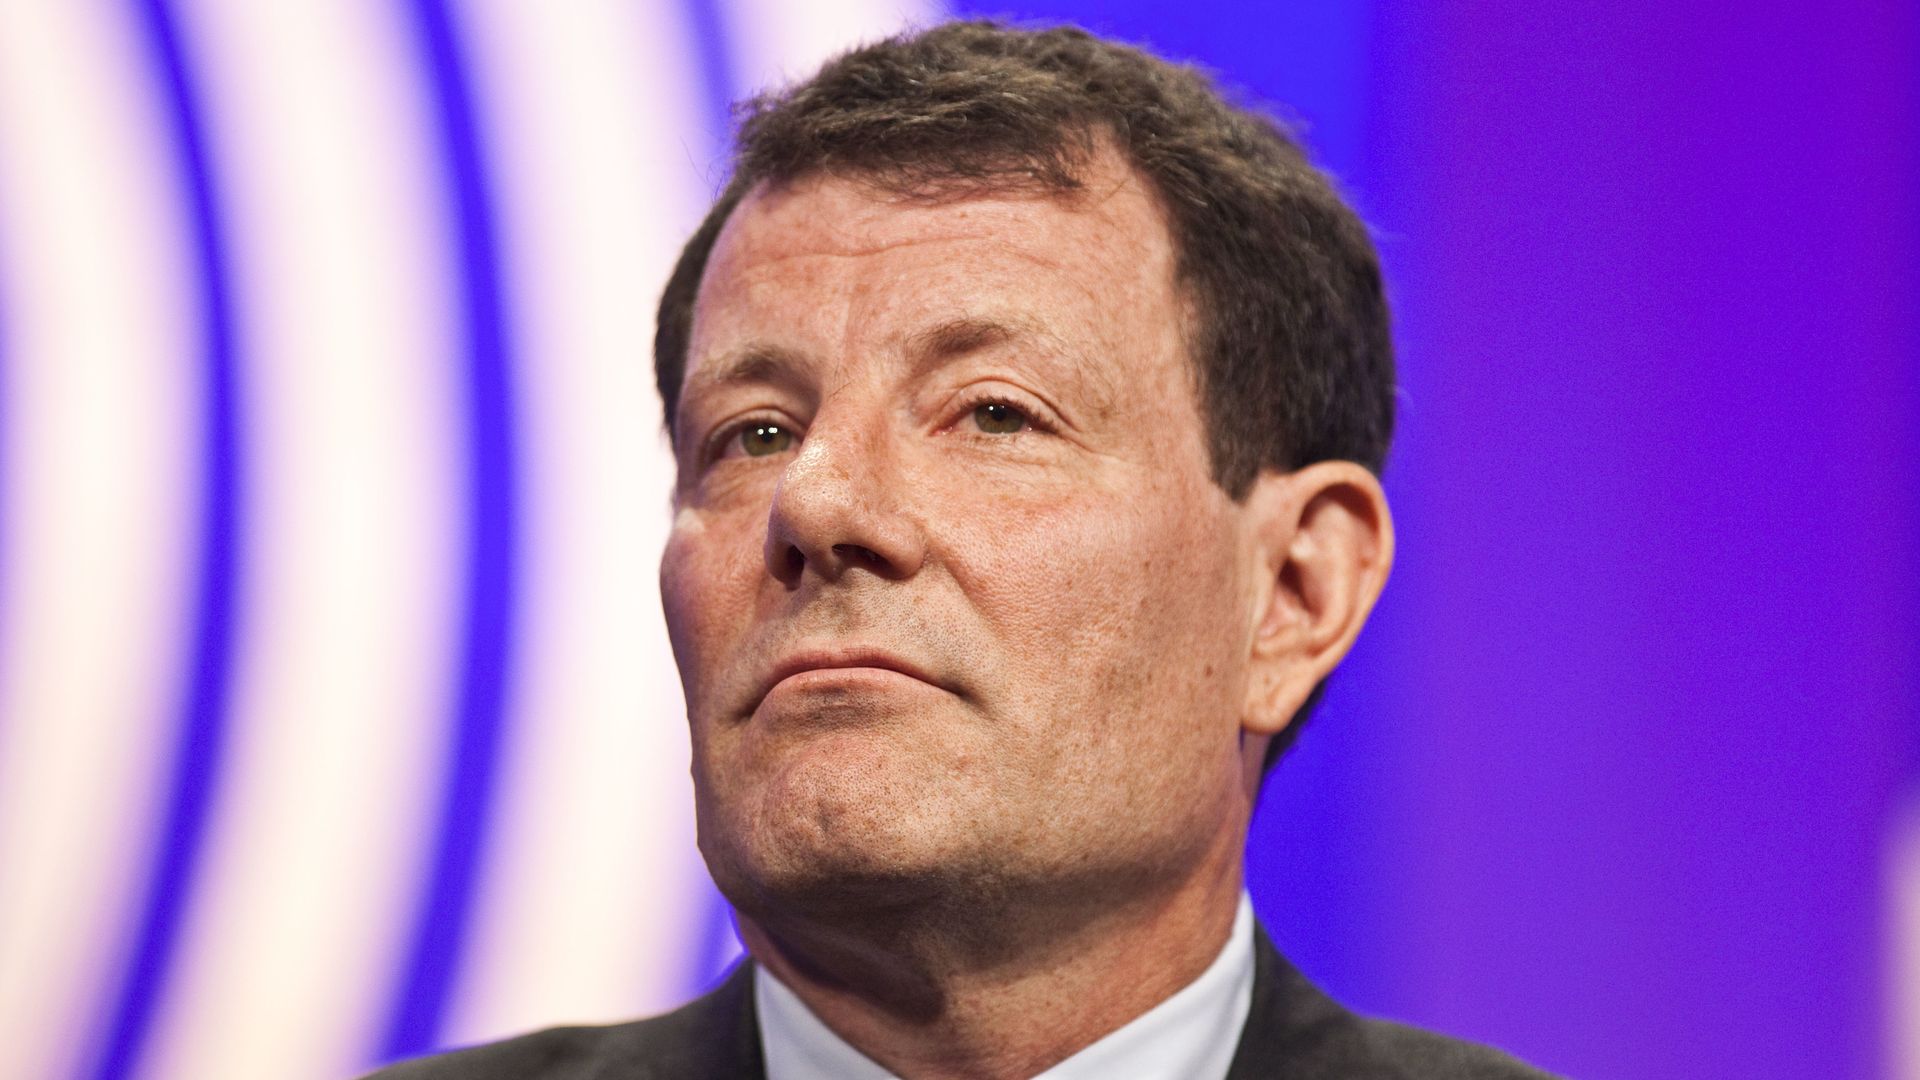 Former New York Times columnist Nicholas Kristof during an annual Clinton Global Initiative meeting in New York in September 2011.